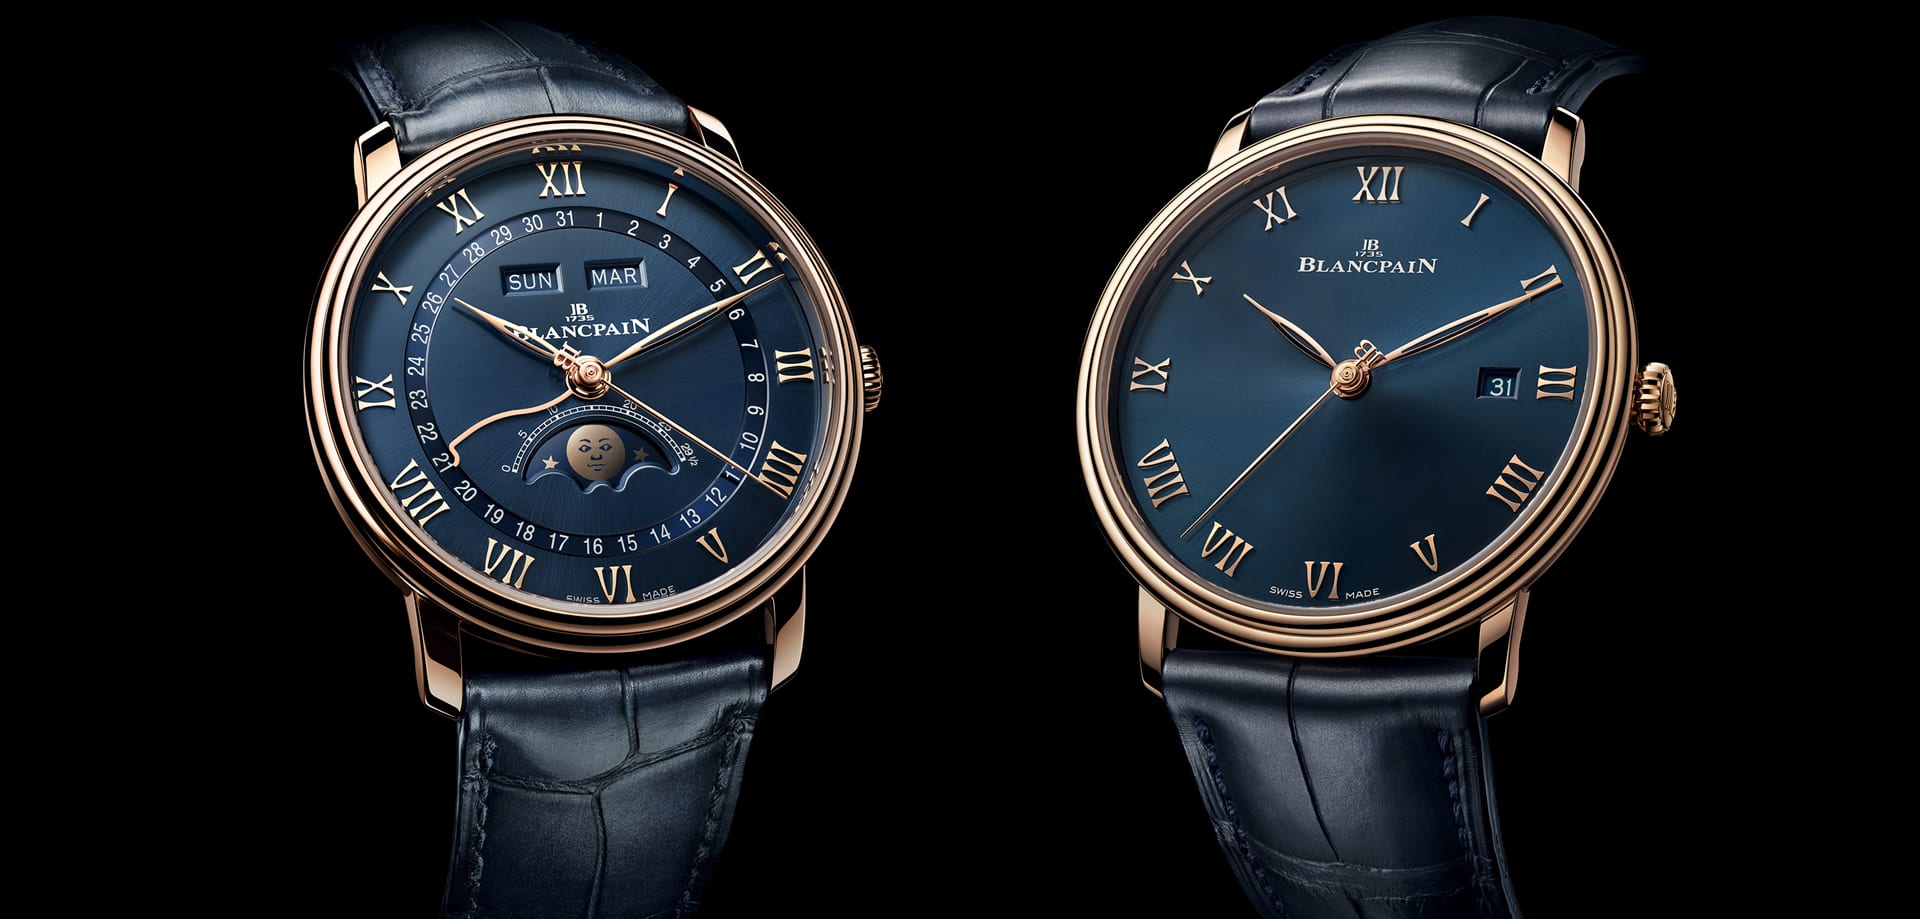 Two Blue-Dial Models Join The Villeret Collection